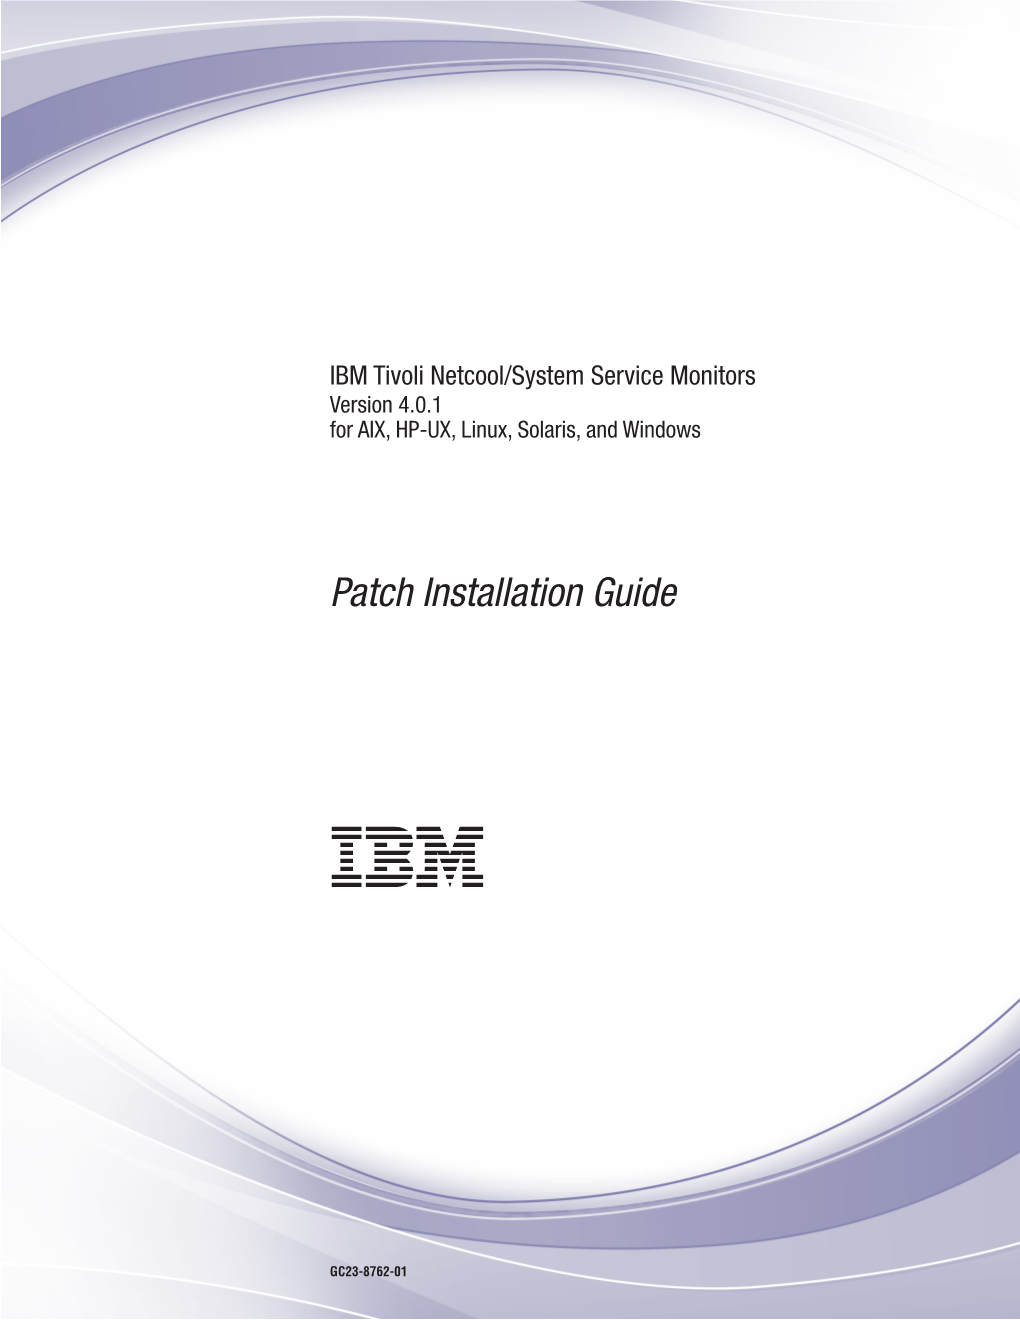 IBM Tivoli Netcool/System Service Monitors: Patch Installation Guide Tables